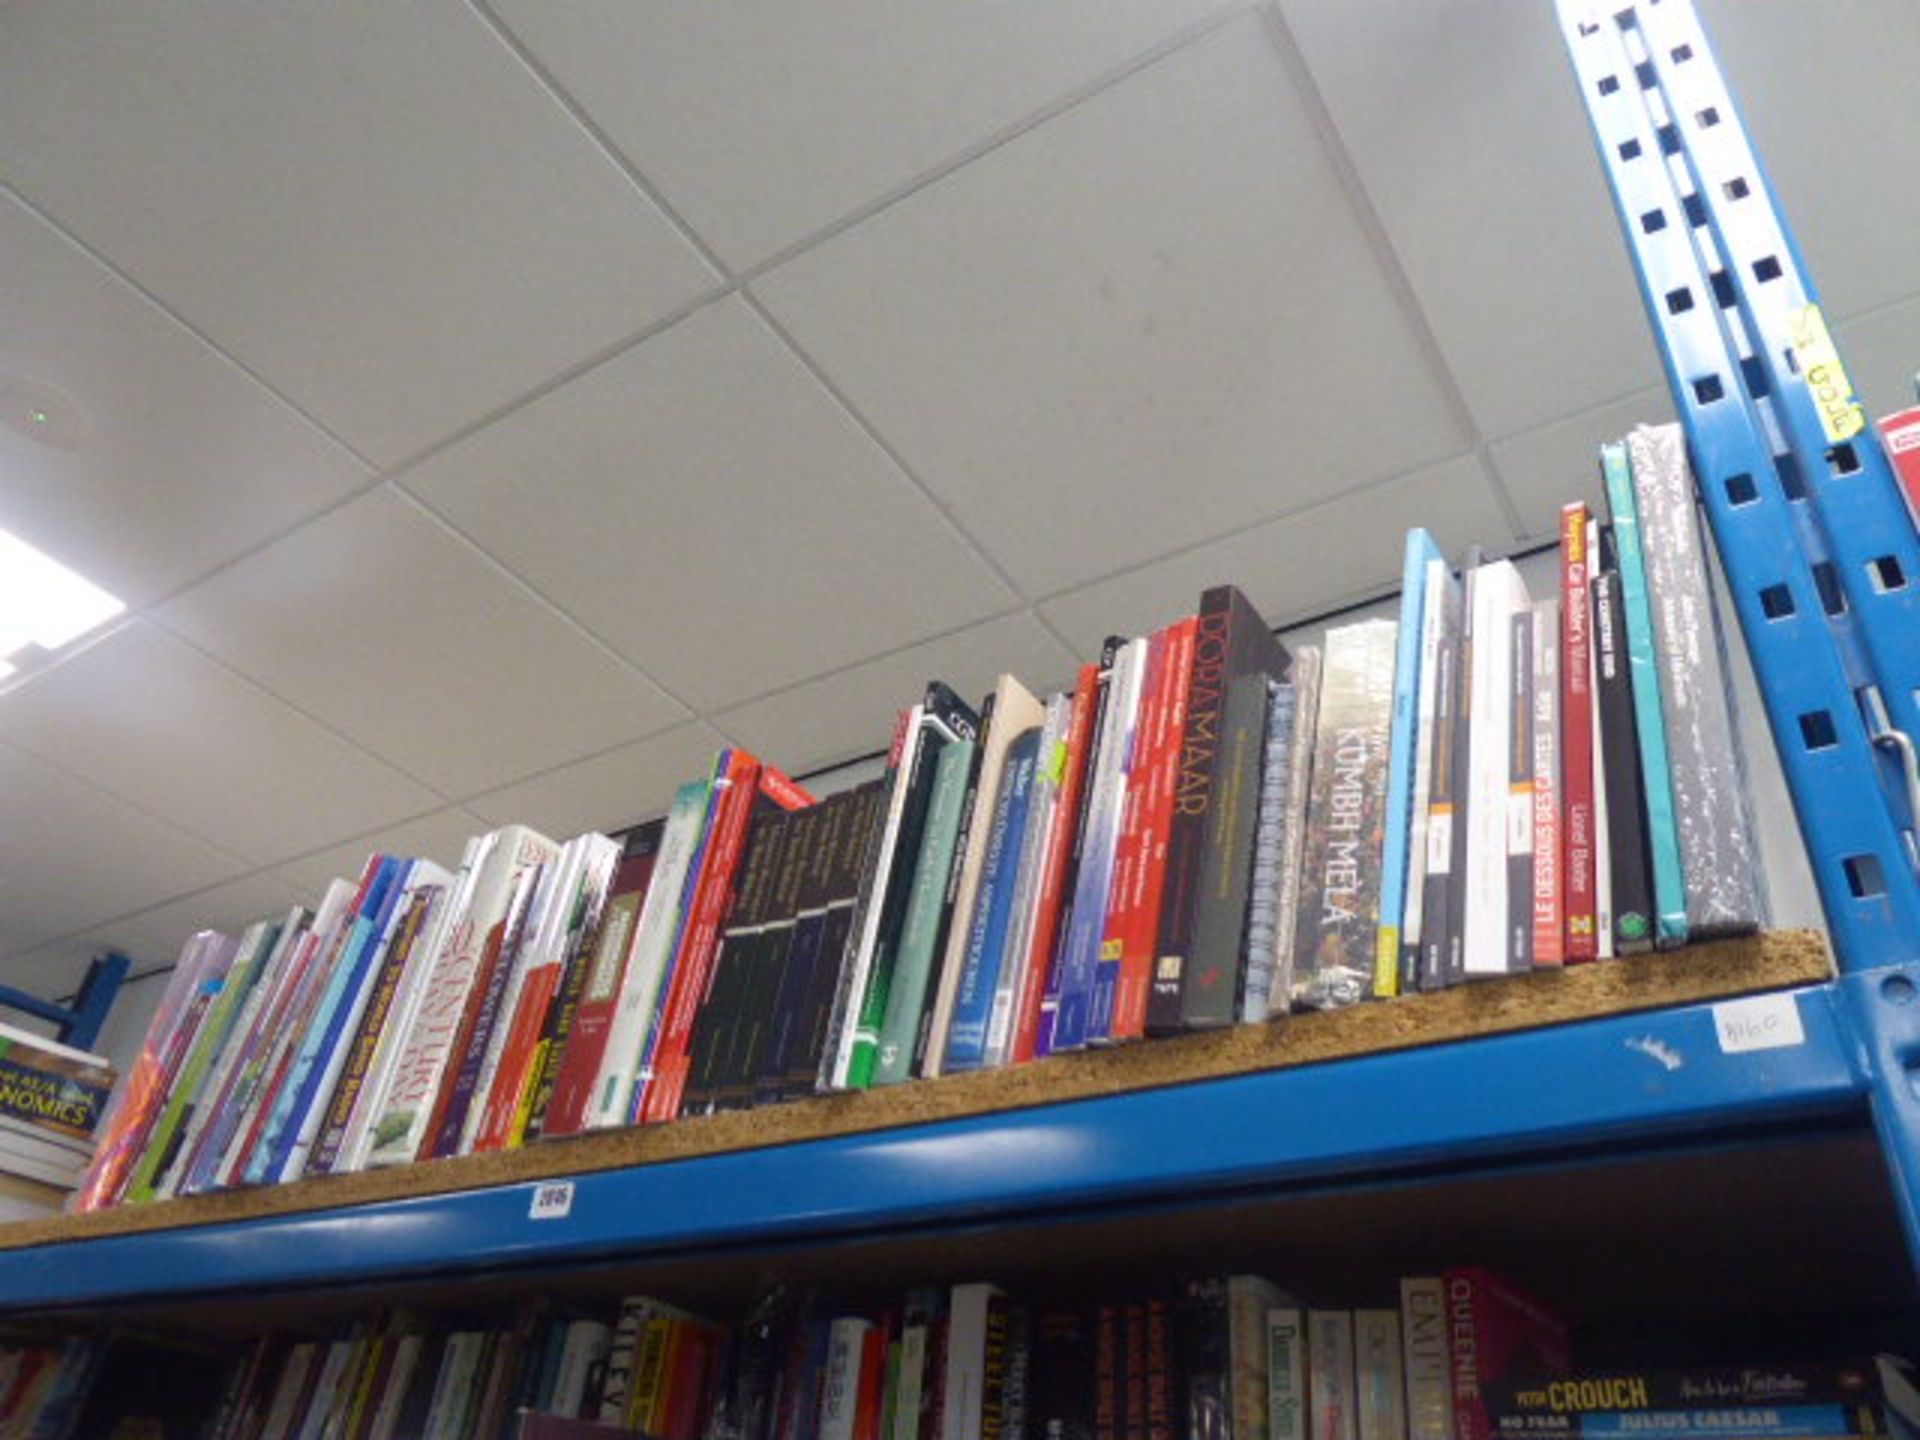 Shelf containing reference materials, various publishers including Pearsons, Cambridge, DK, etc.